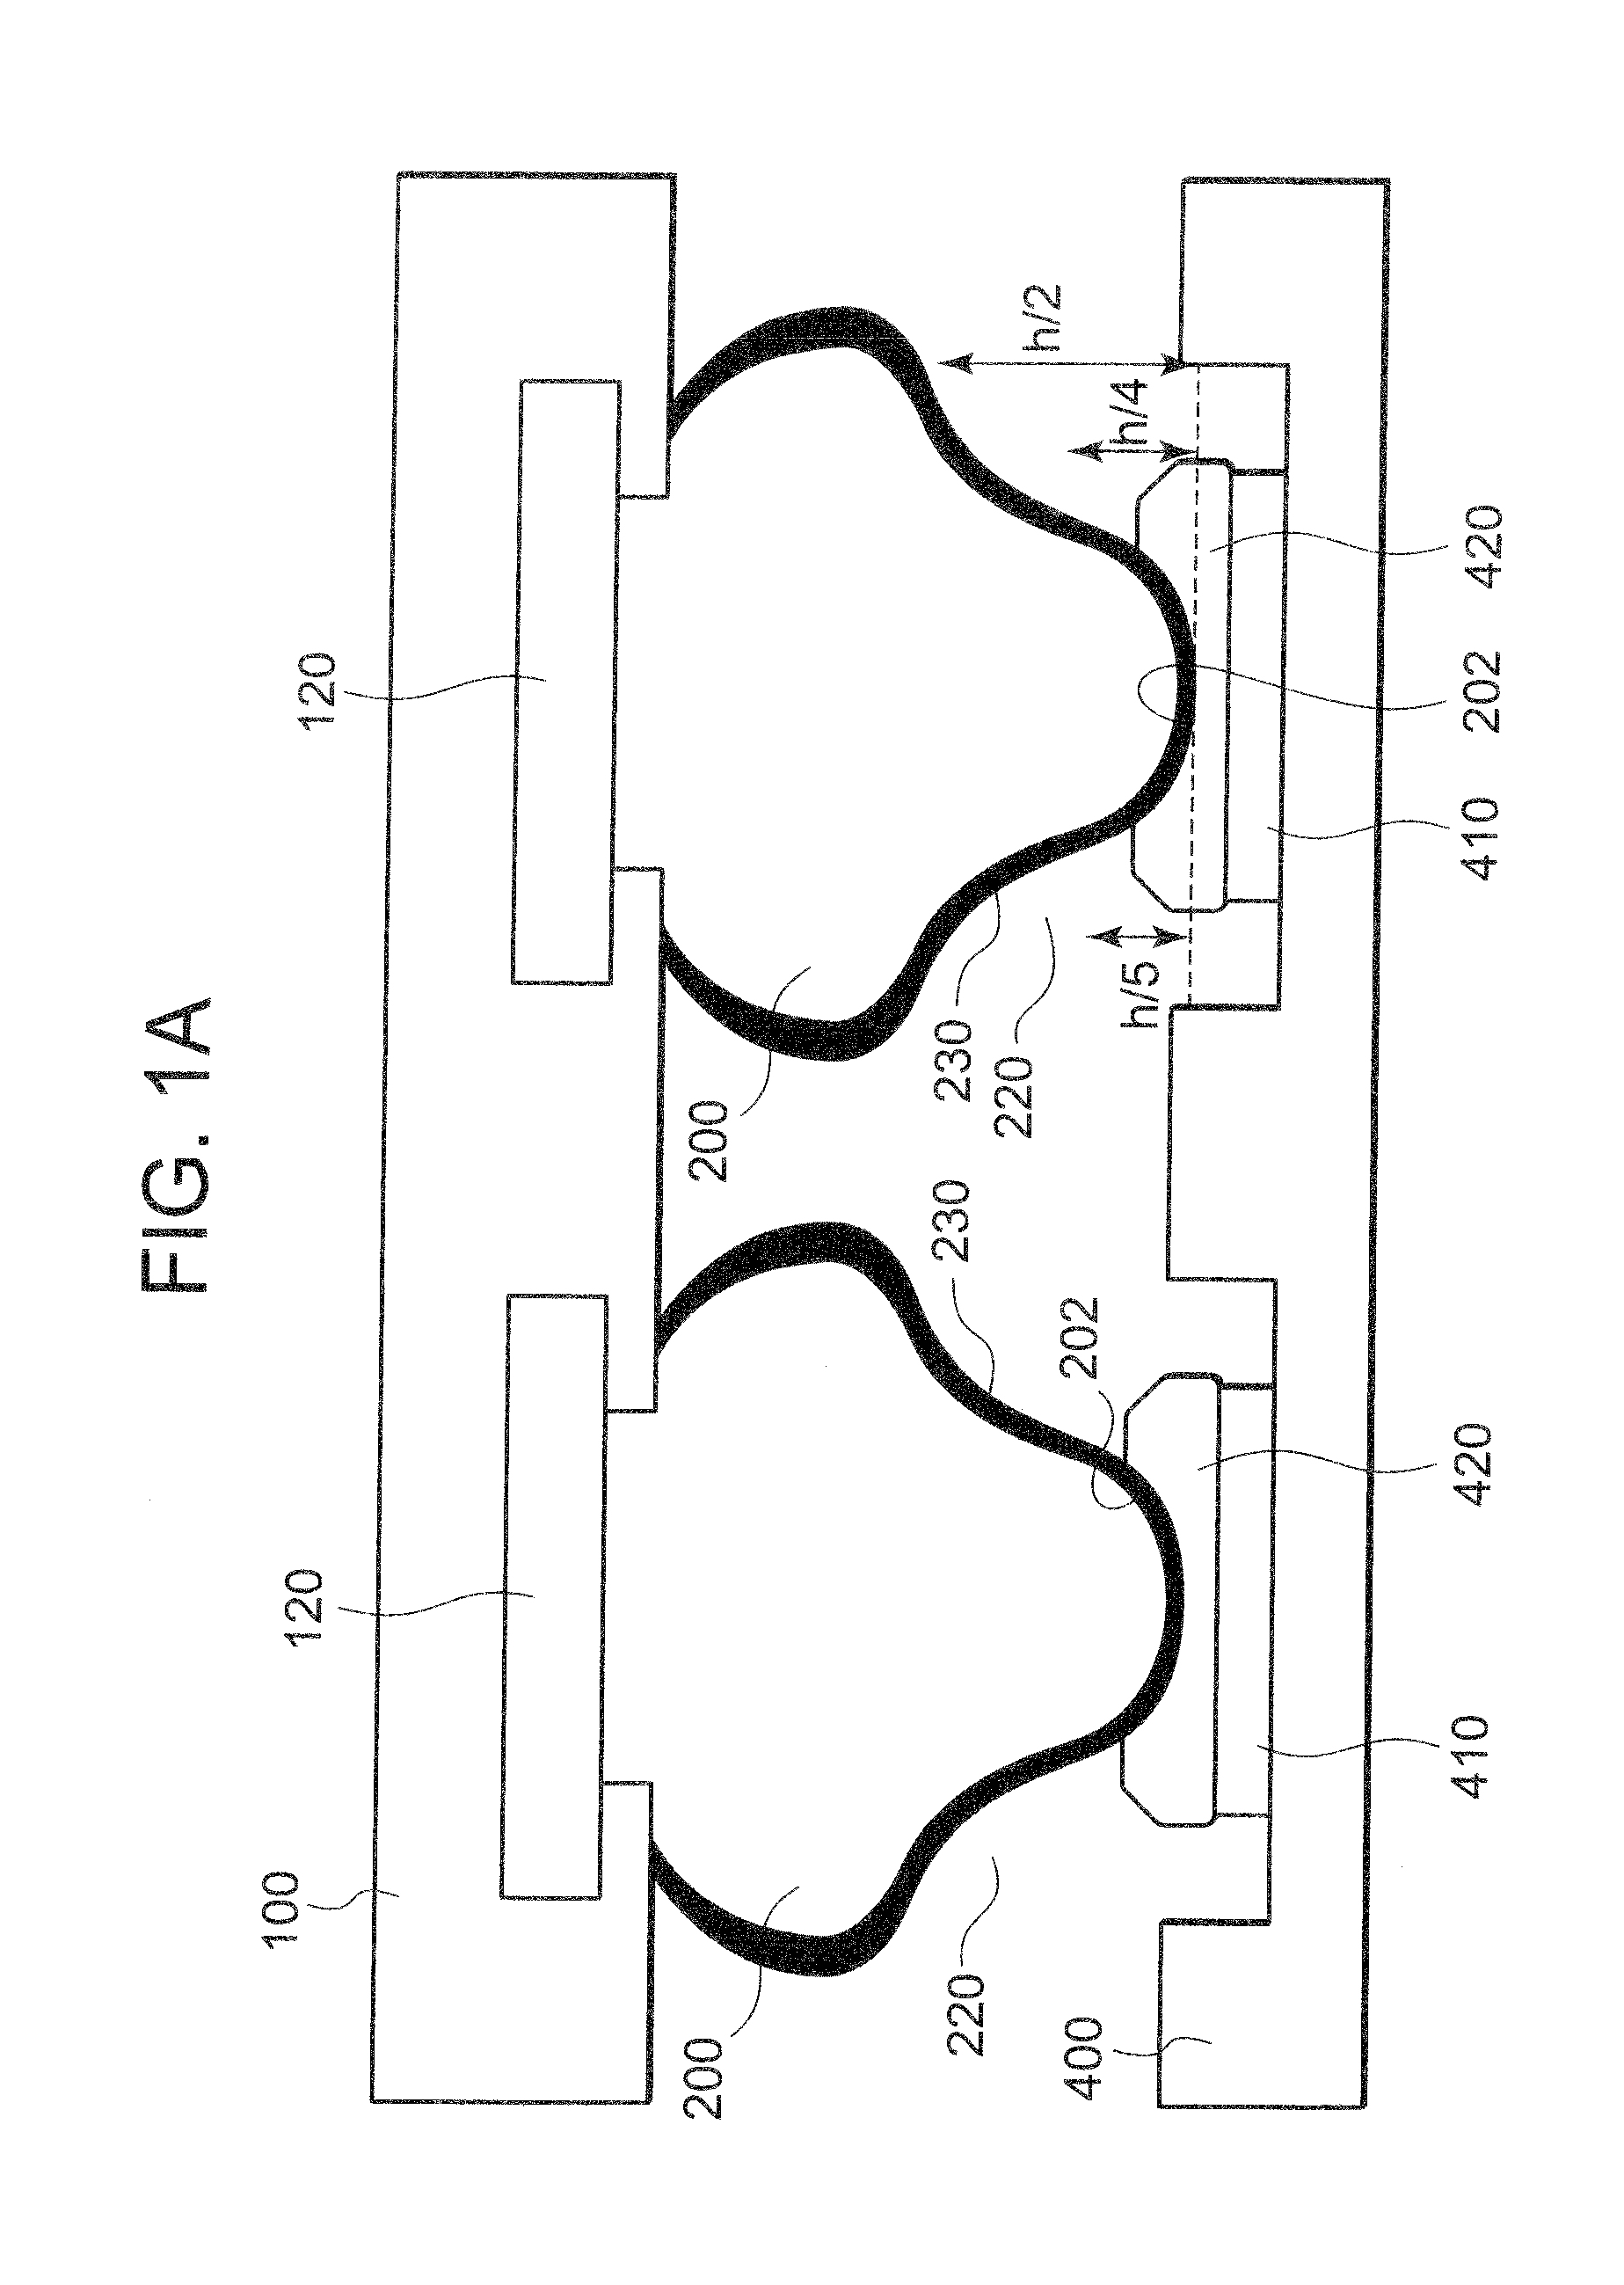 Method of manufacturing electronic components having bump